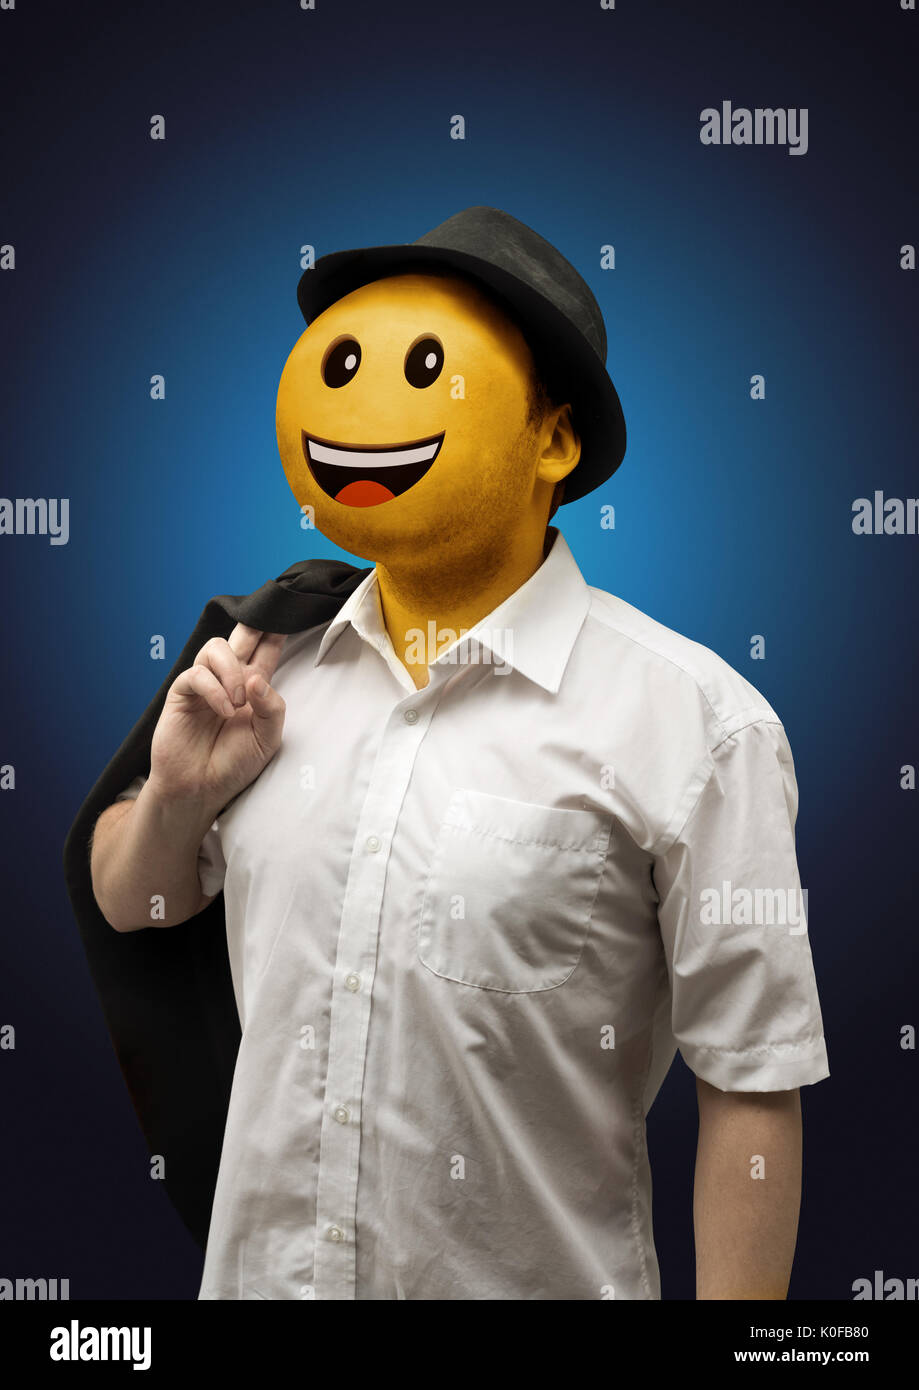 A happy surreal businessman with a playful yellow happy face emoticon portrait. Stock Photo